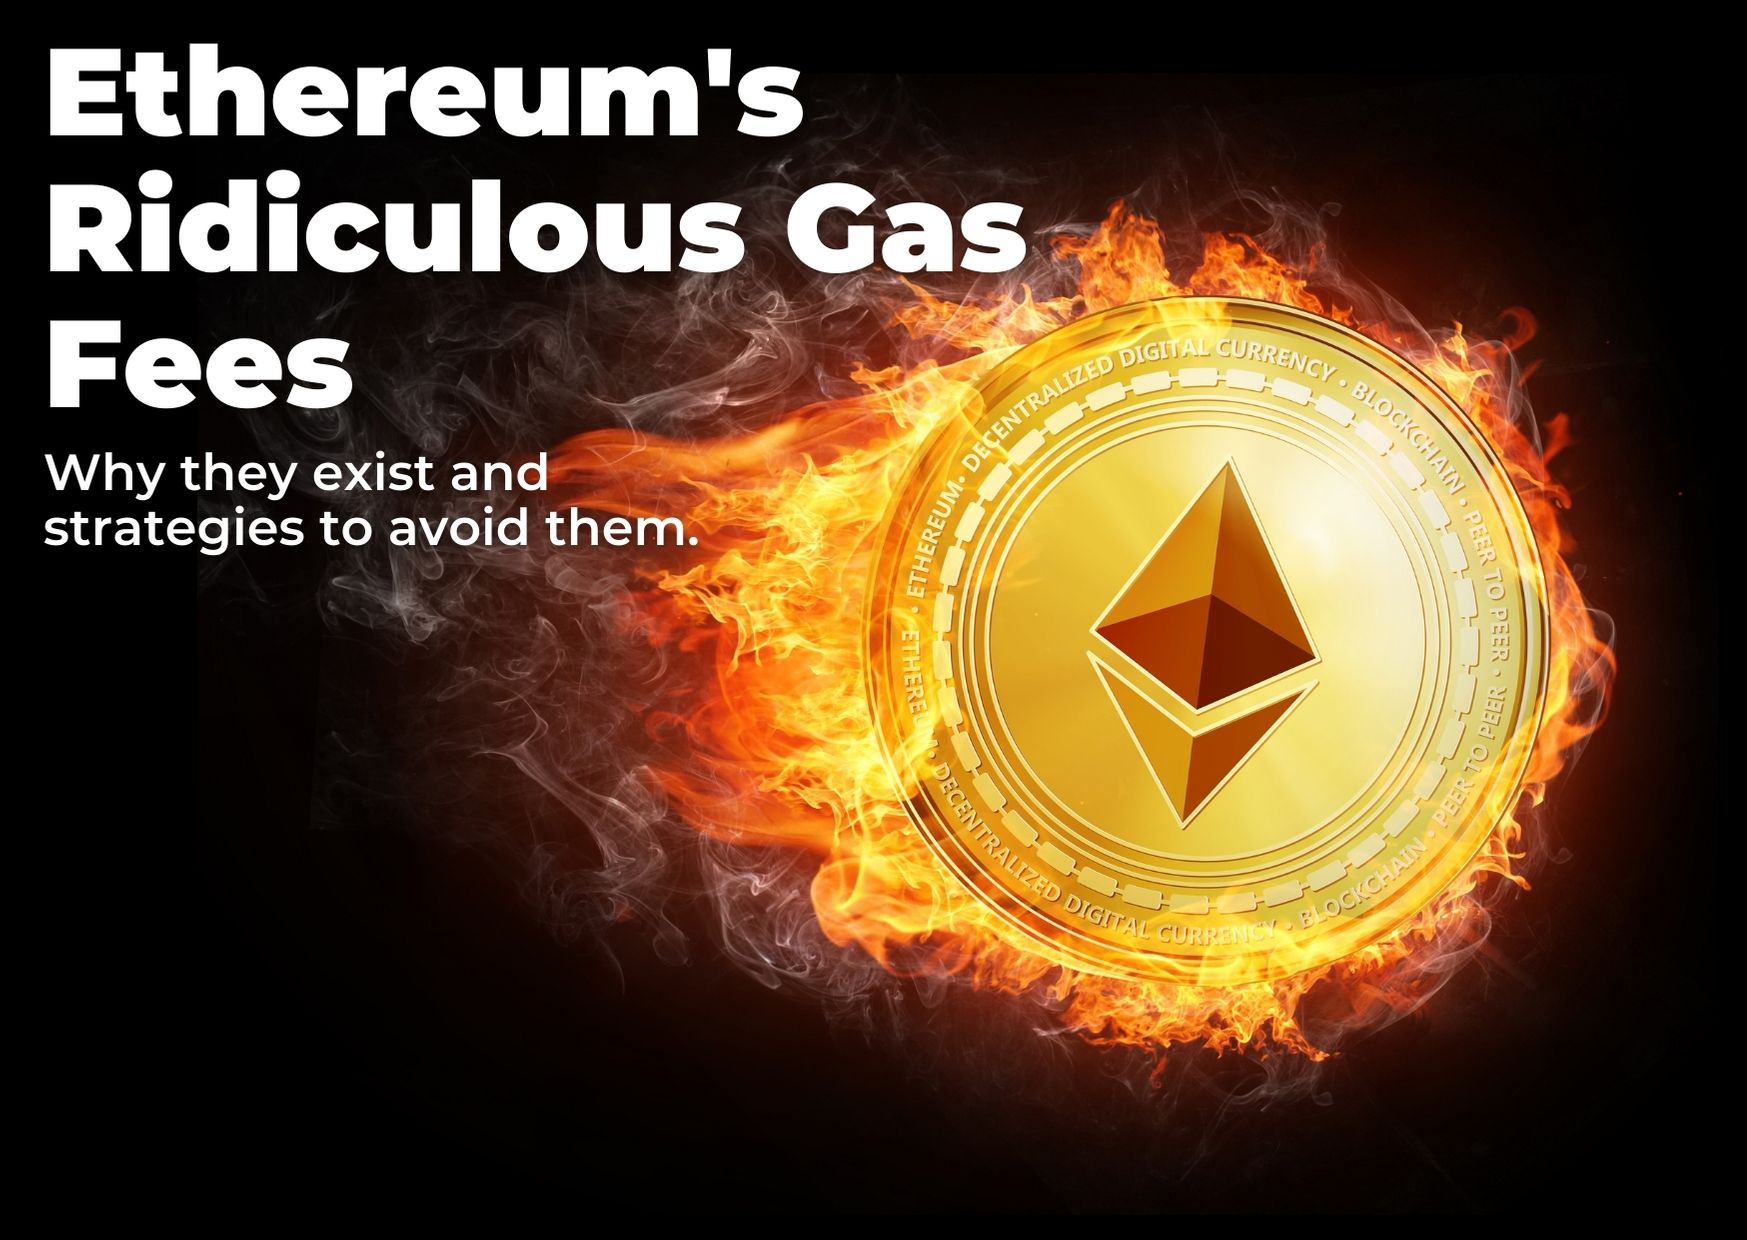 Ethereum's Ridiculously High Gas Fees